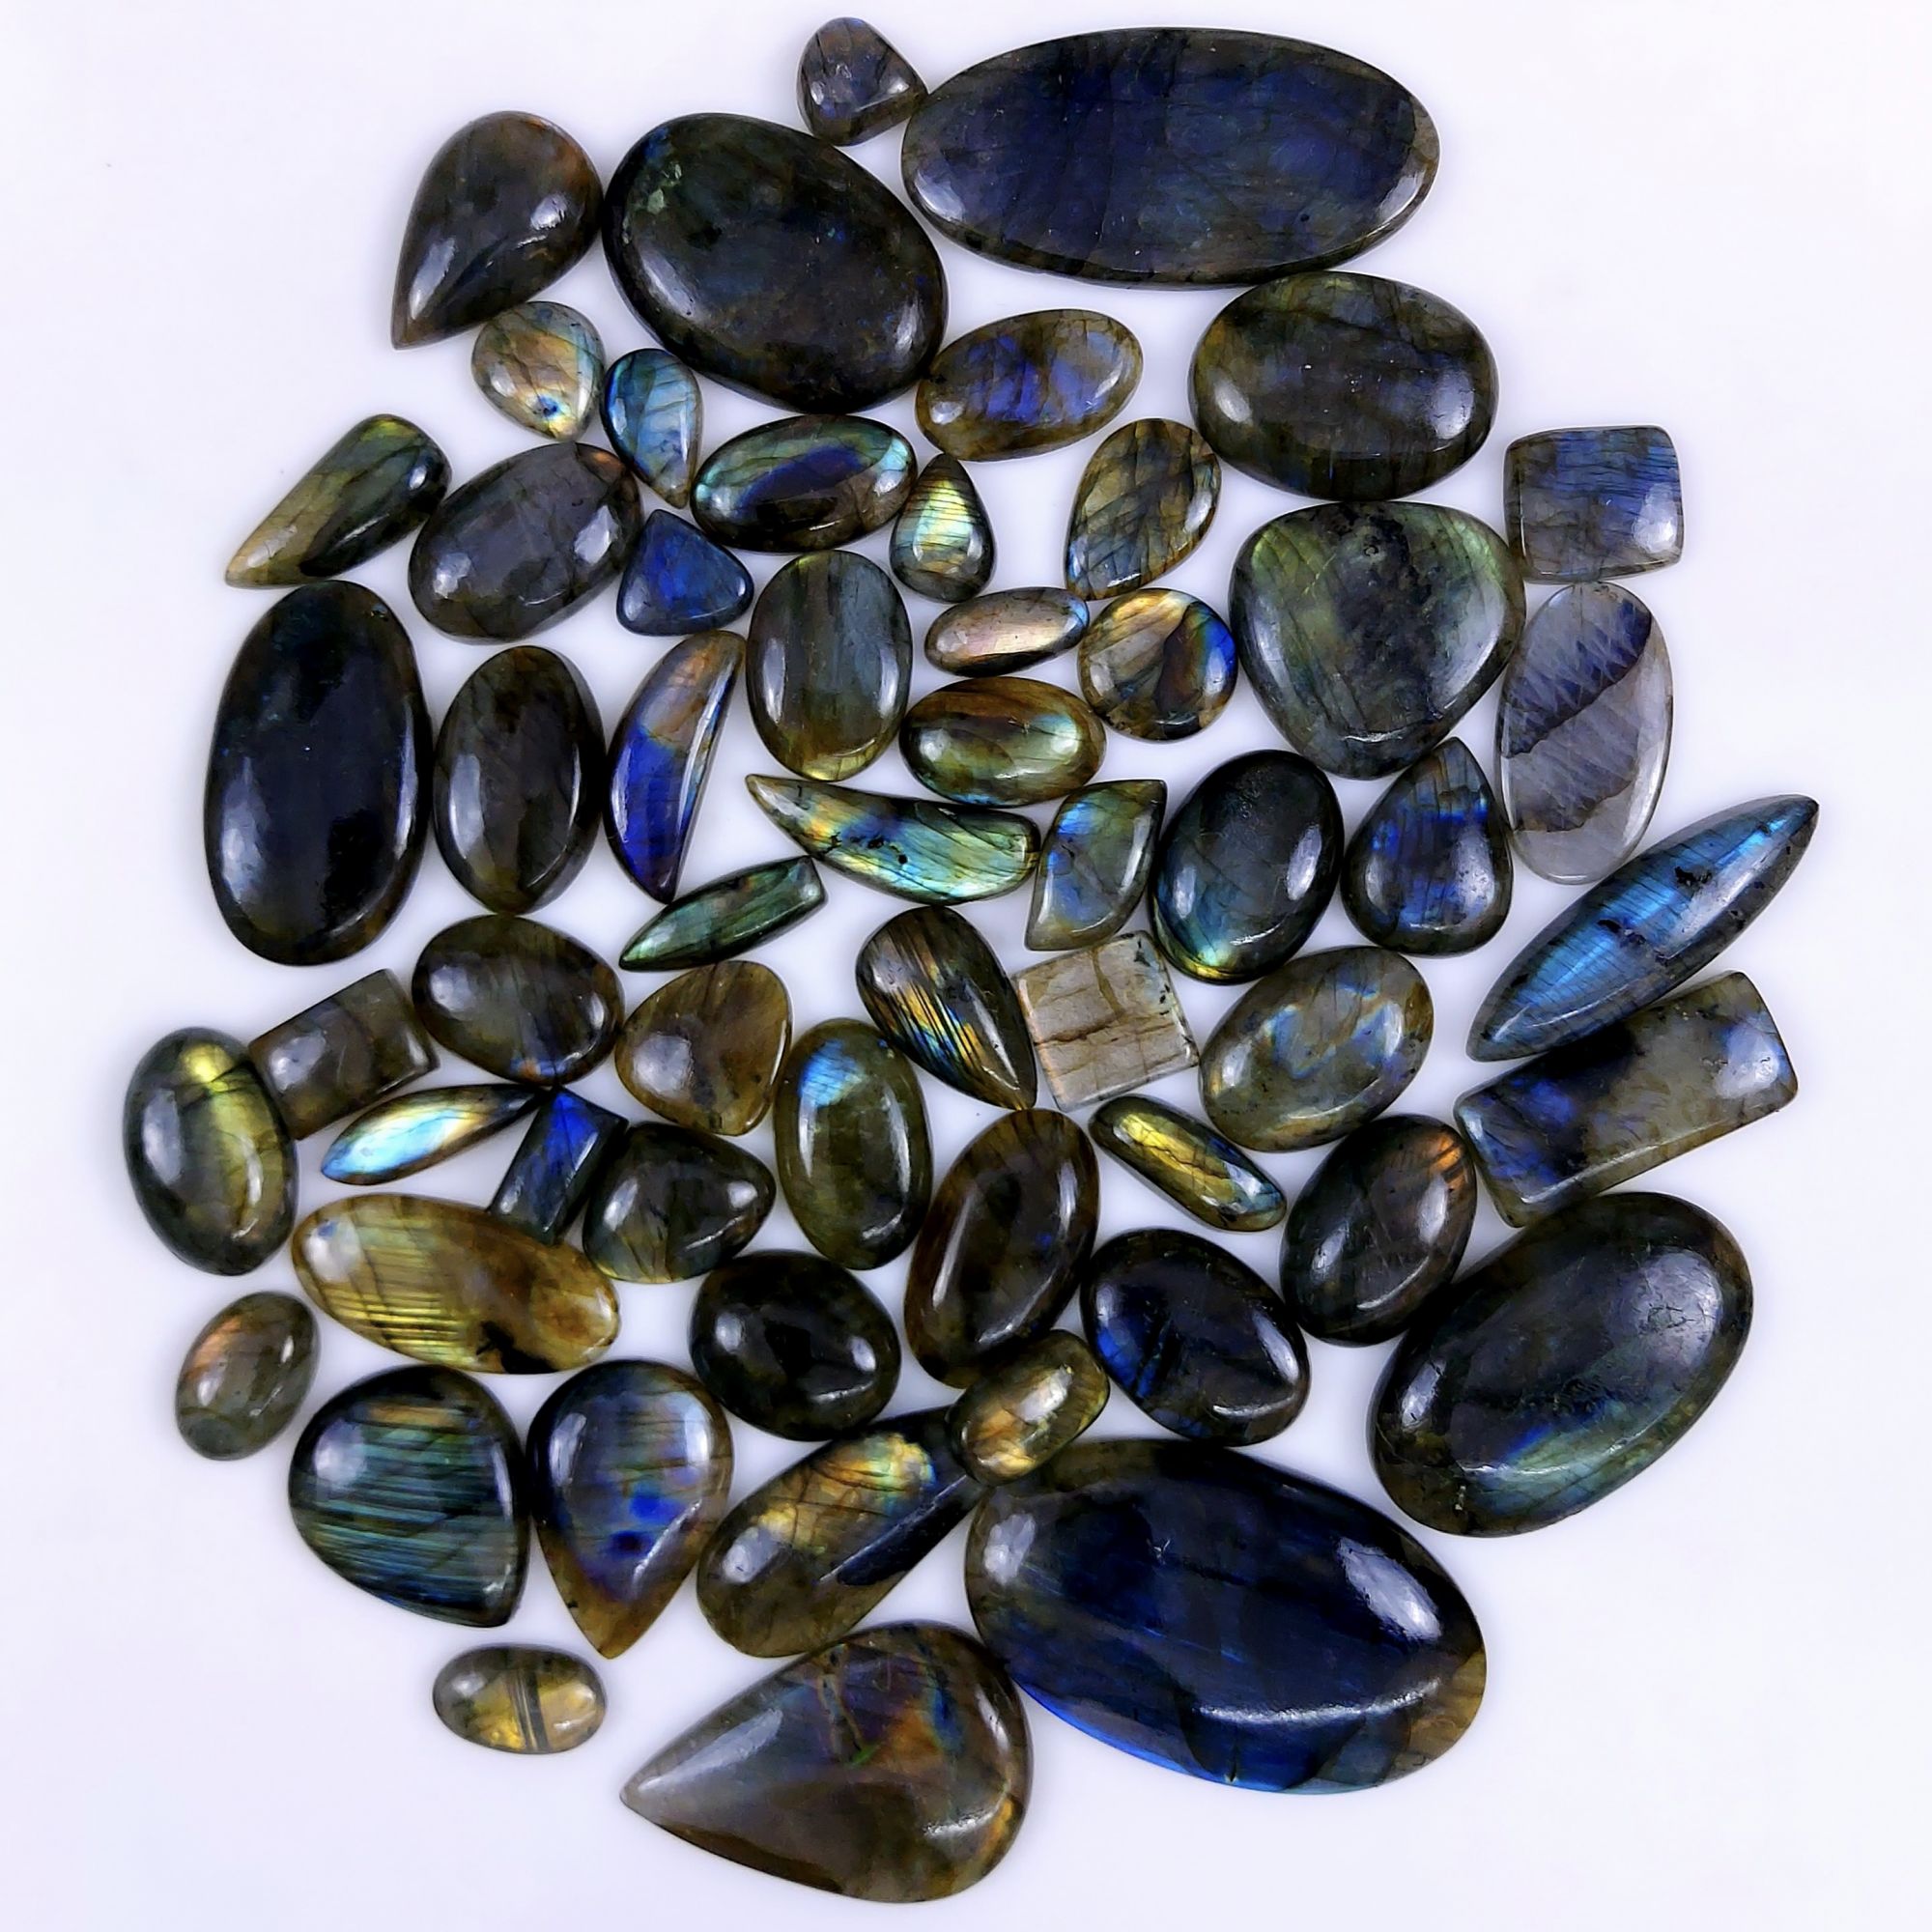 57pc 1774Cts Labradorite Cabochon Multifire Healing Crystal For Jewelry Supplies, Labradorite Necklace Handmade Wire Wrapped Gemstone Pendant 60x35 15x15mm#6273